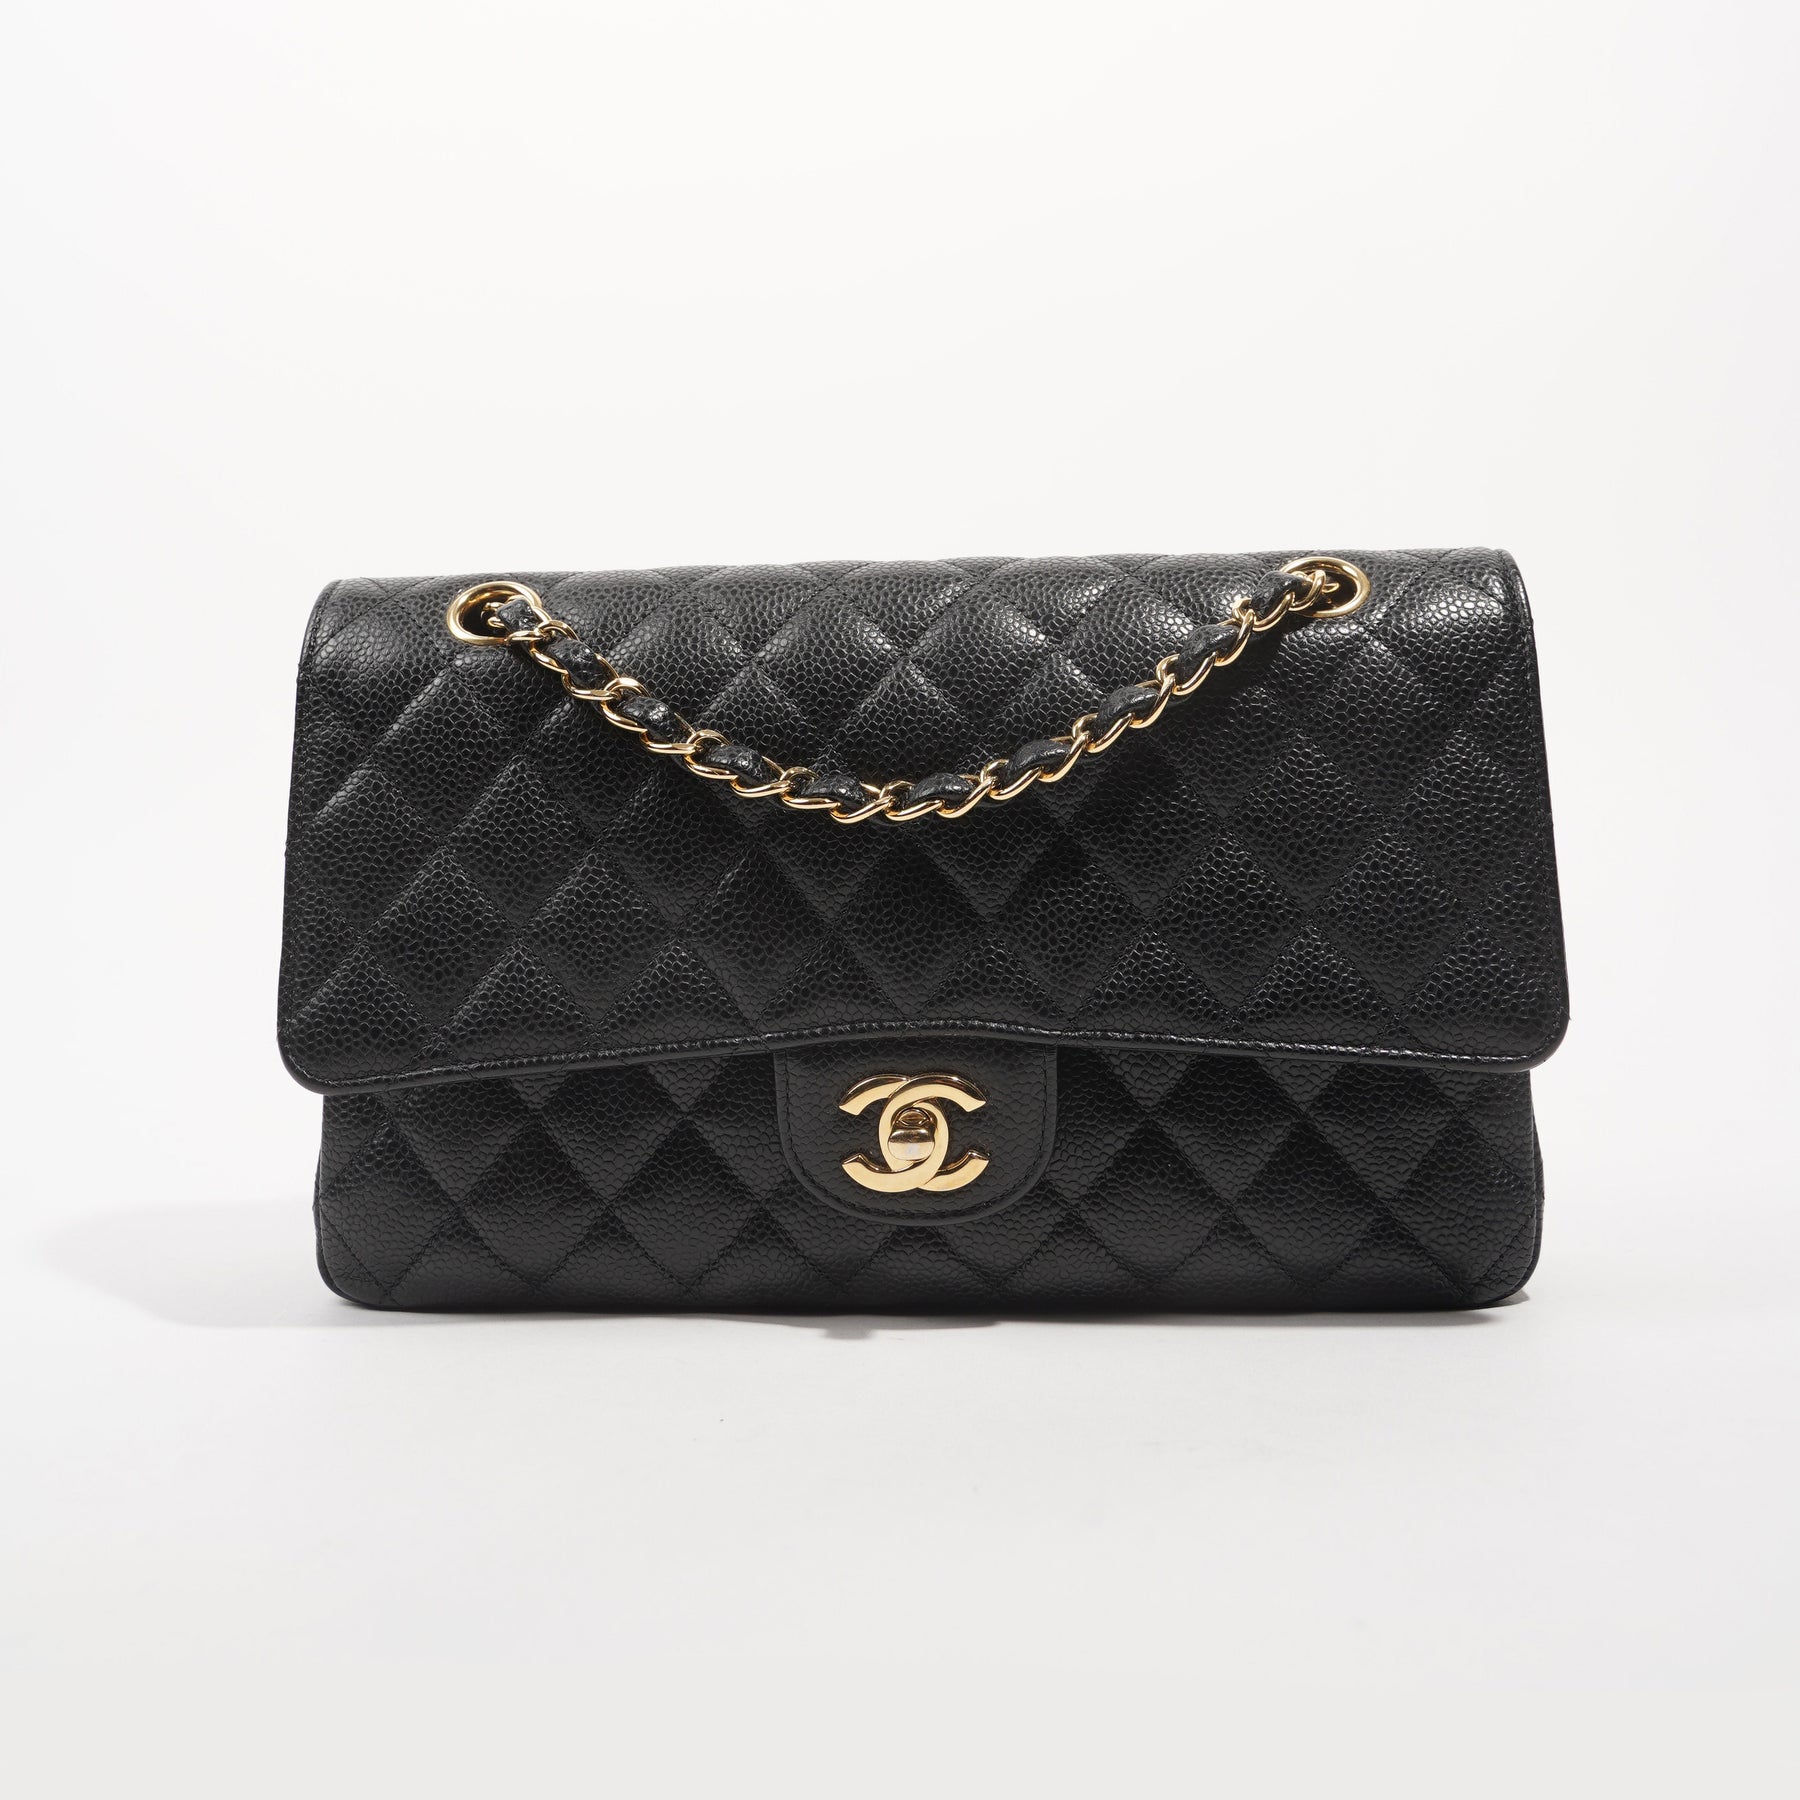 Chanel Clams Pocket Flap Bag Quilted Metallic